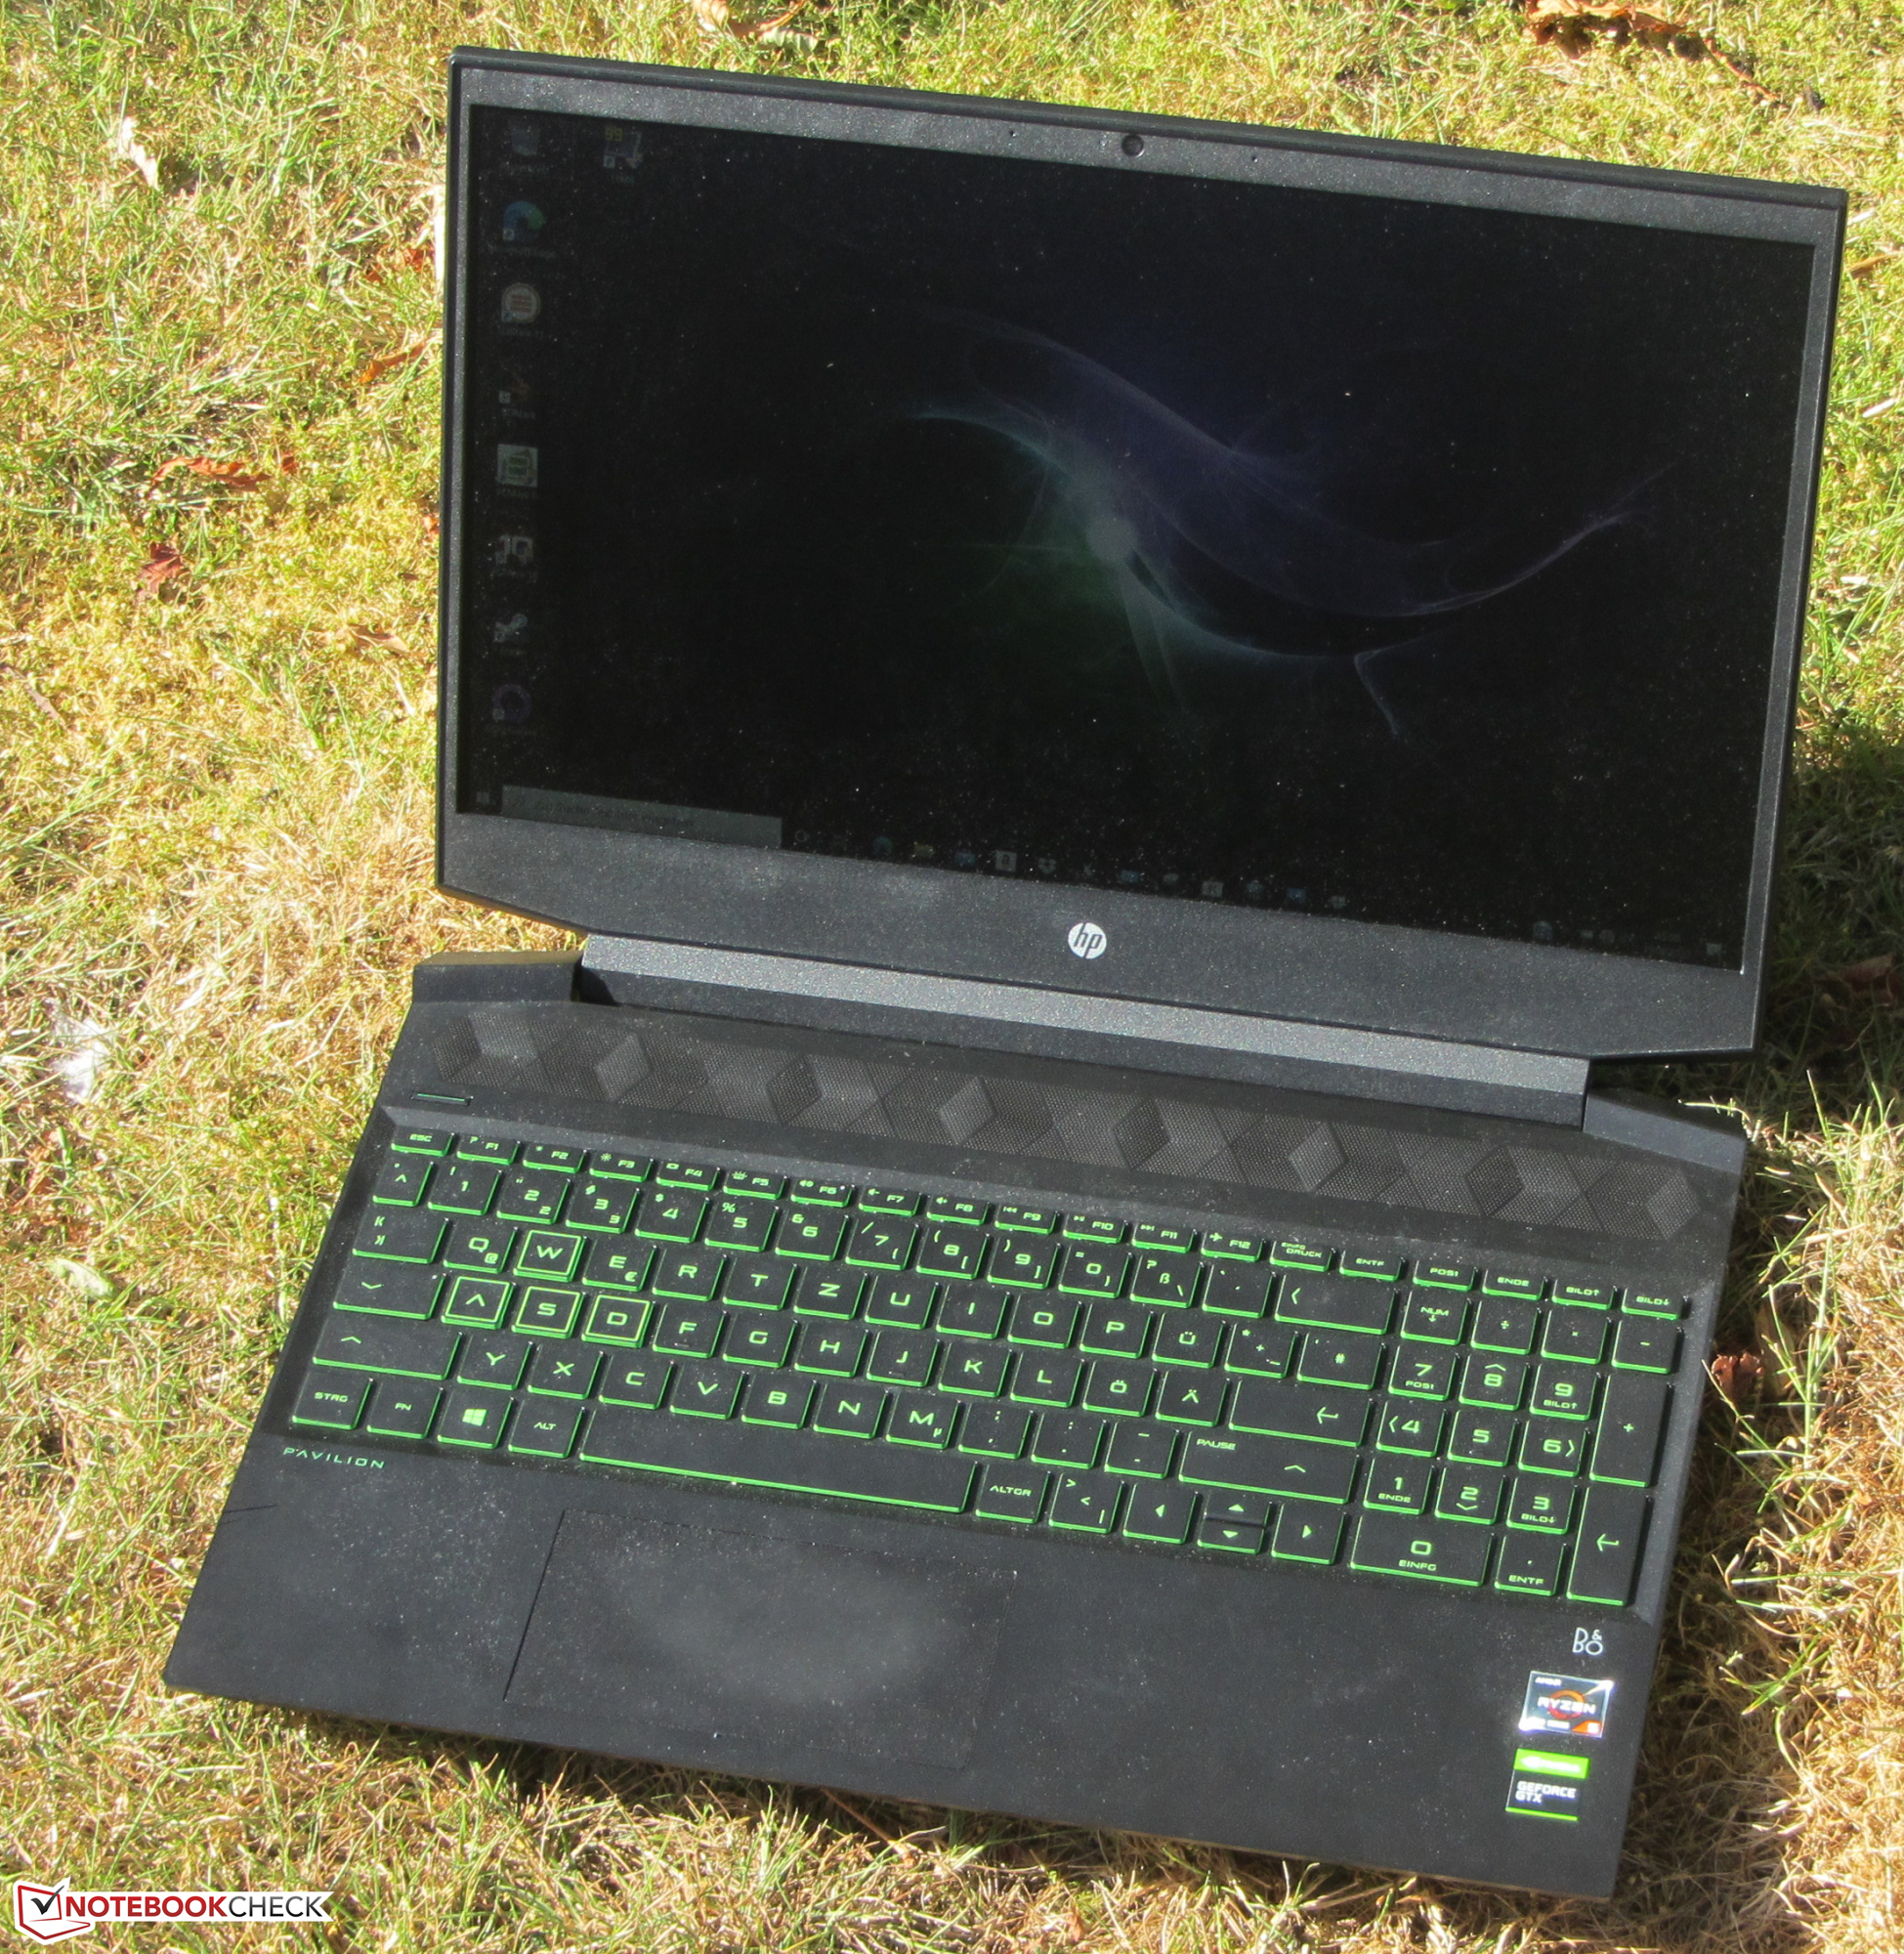 kontrast kold Anerkendelse HP Pavilion Gaming 15 in review: Inexpensive gaming laptop with a lot of  power under the hood - NotebookCheck.net Reviews